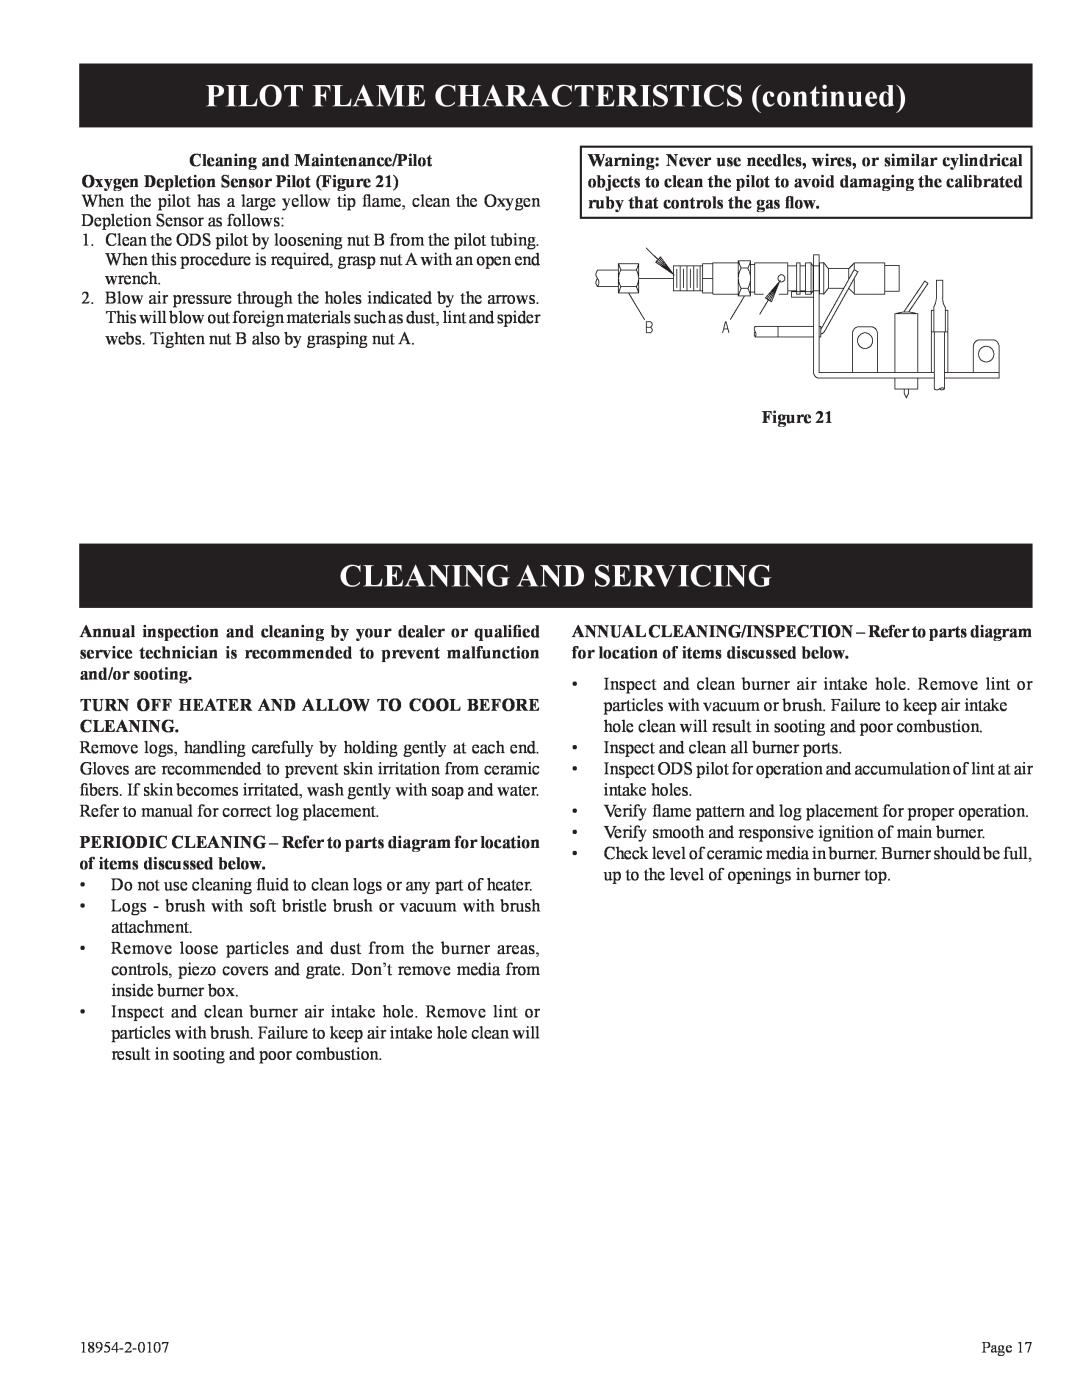 Empire Comfort Systems VFSM-30-3 installation instructions PILOT FLAME CHARACTERISTICS continued, Cleaning And Servicing 